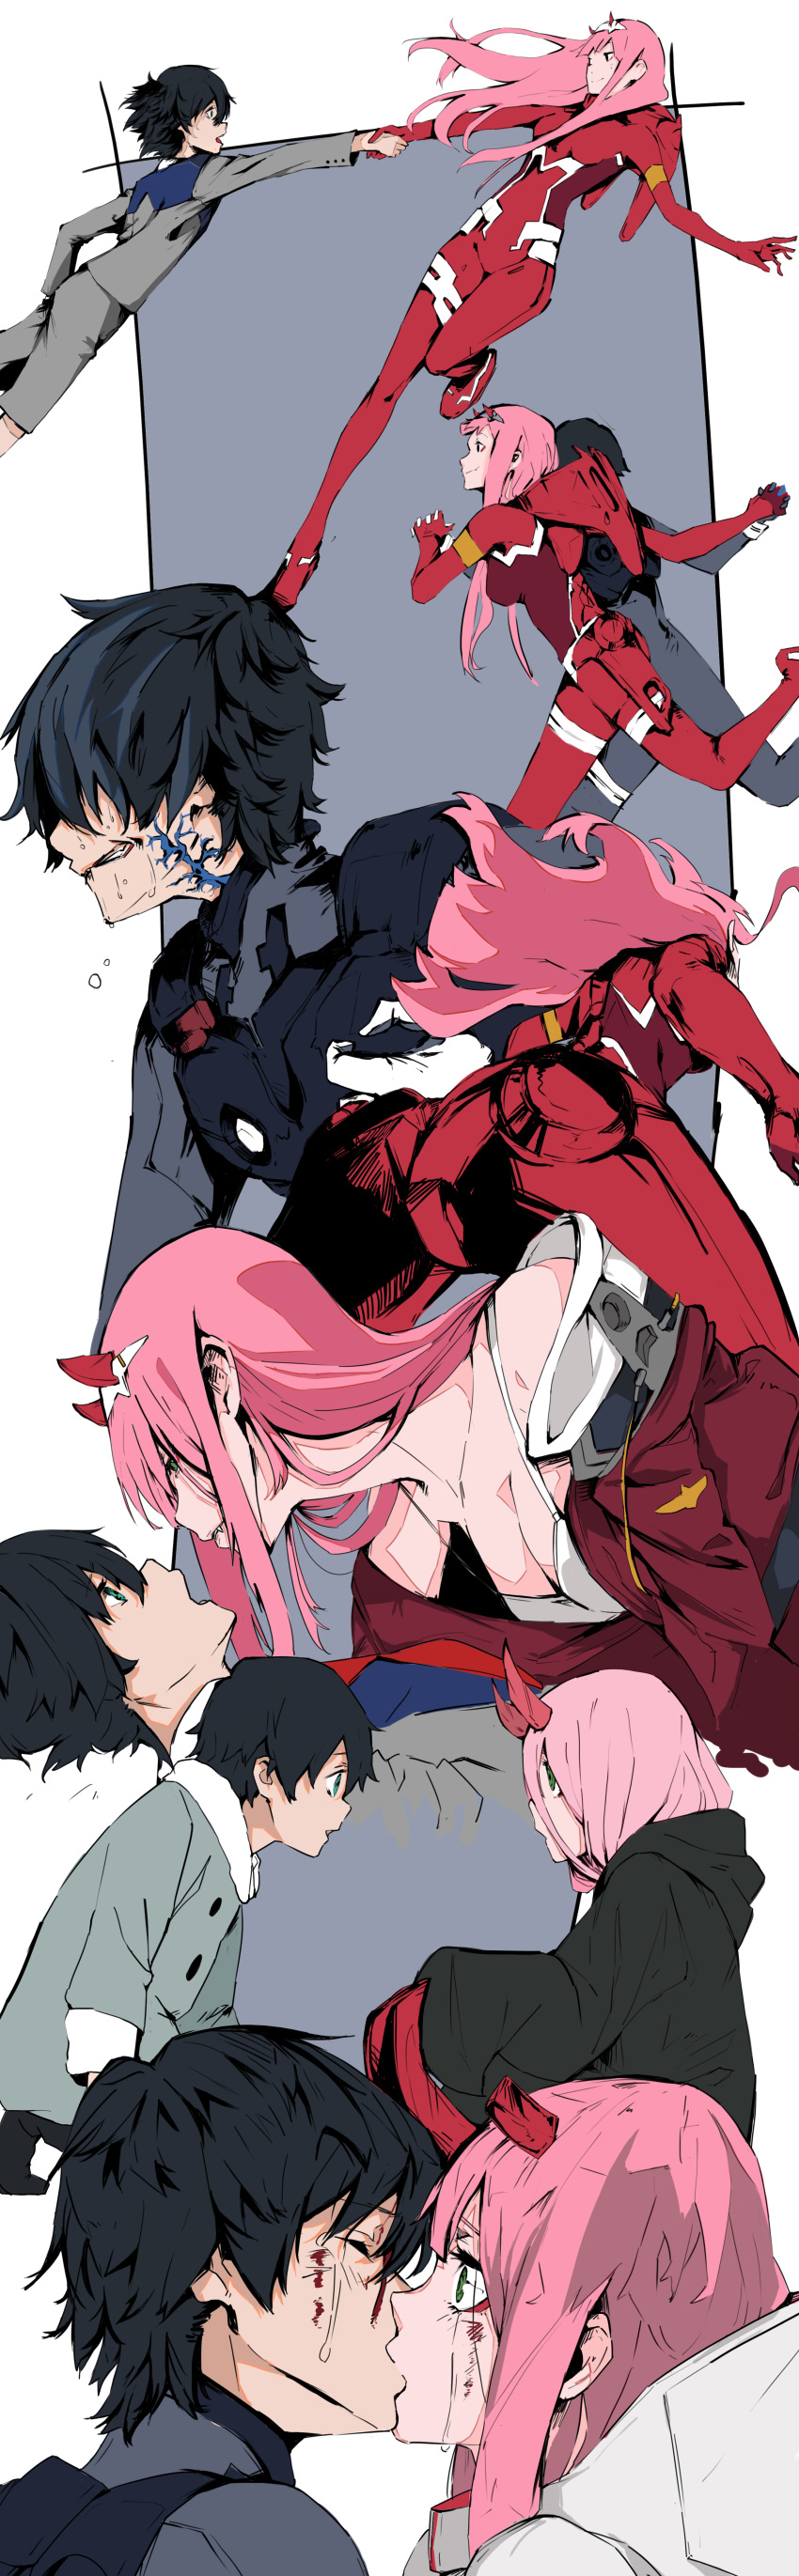 1boy 1girl absurdres black_hair couple darling_in_the_franxx face-to-face highres hiro_(darling_in_the_franxx) horns kiss long_hair looking_at_another pilot_suit pink_hair short_hair touwaki14 zero_two_(darling_in_the_franxx)